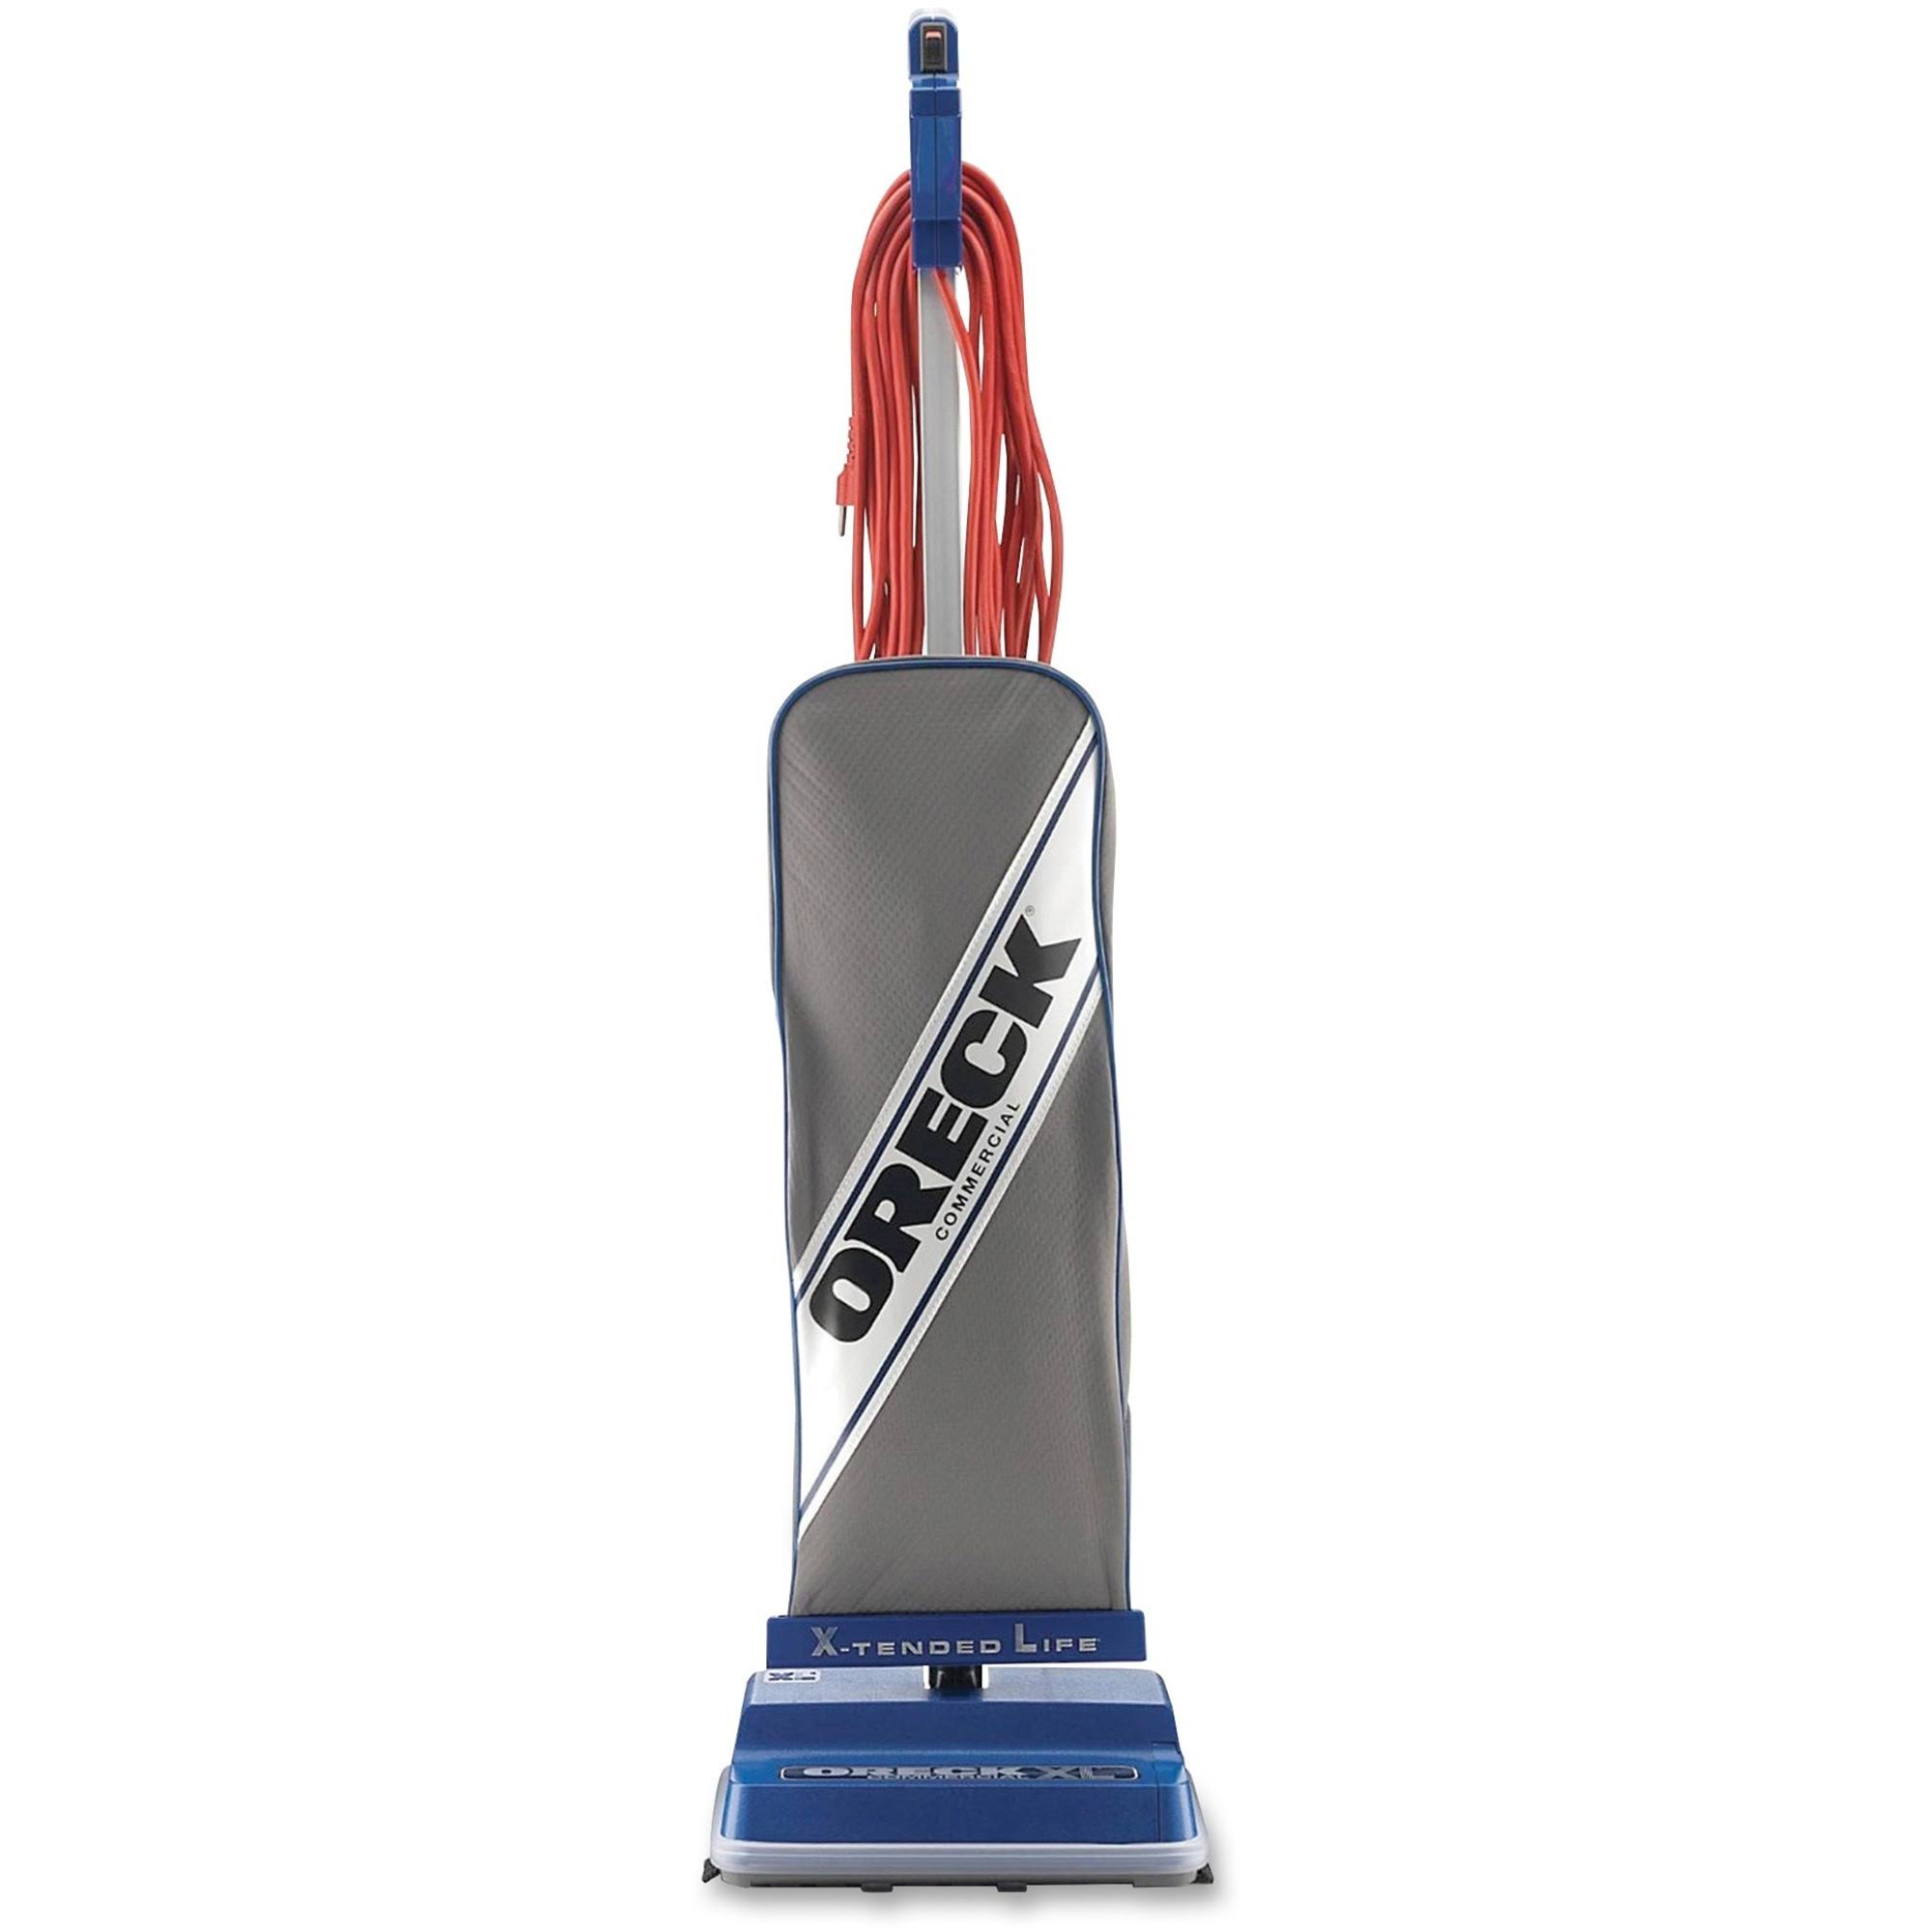 Oreck Commercial Upright Vacuum - Blue, Grey